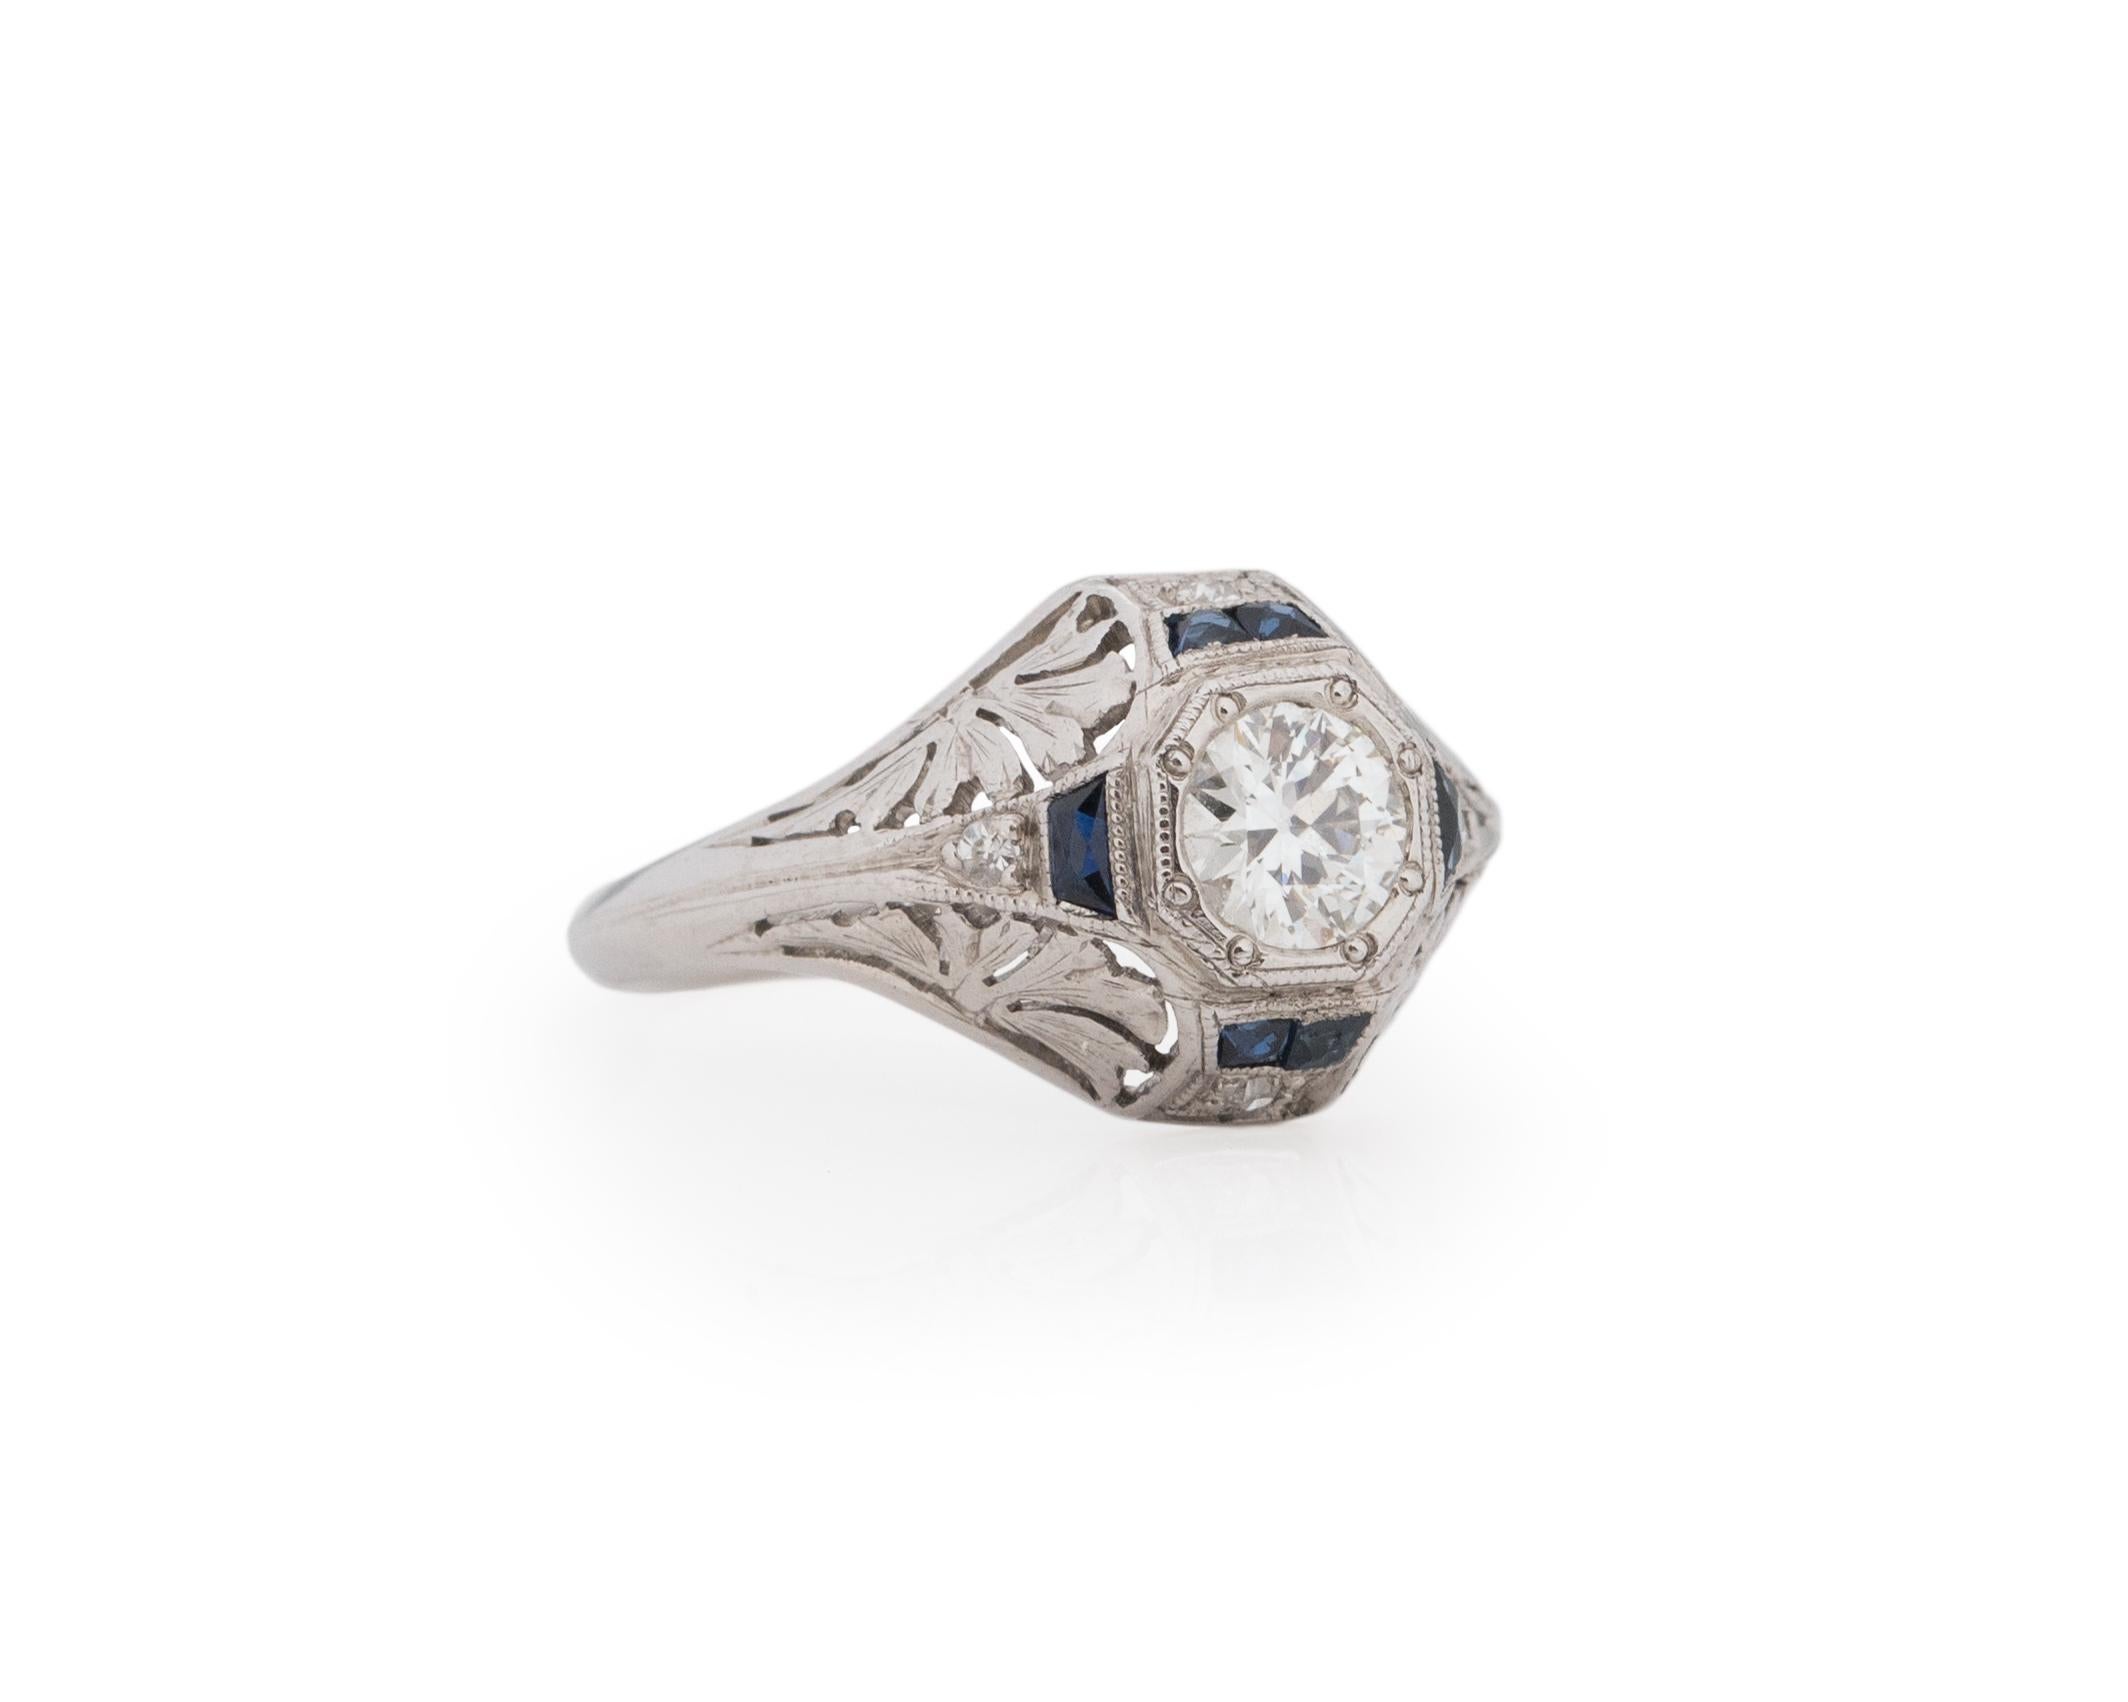 Ring Size: 5.25
Metal Type: Platinum [Hallmarked, and Tested]
Weight: 3.0 grams

Center Diamond Details:
Weight: .35ct
Cut: Old European brilliant
Color: F
Clarity: VS

Sapphire Details: Blue, French Cut, Natural

Finger to Top of Stone Measurement: